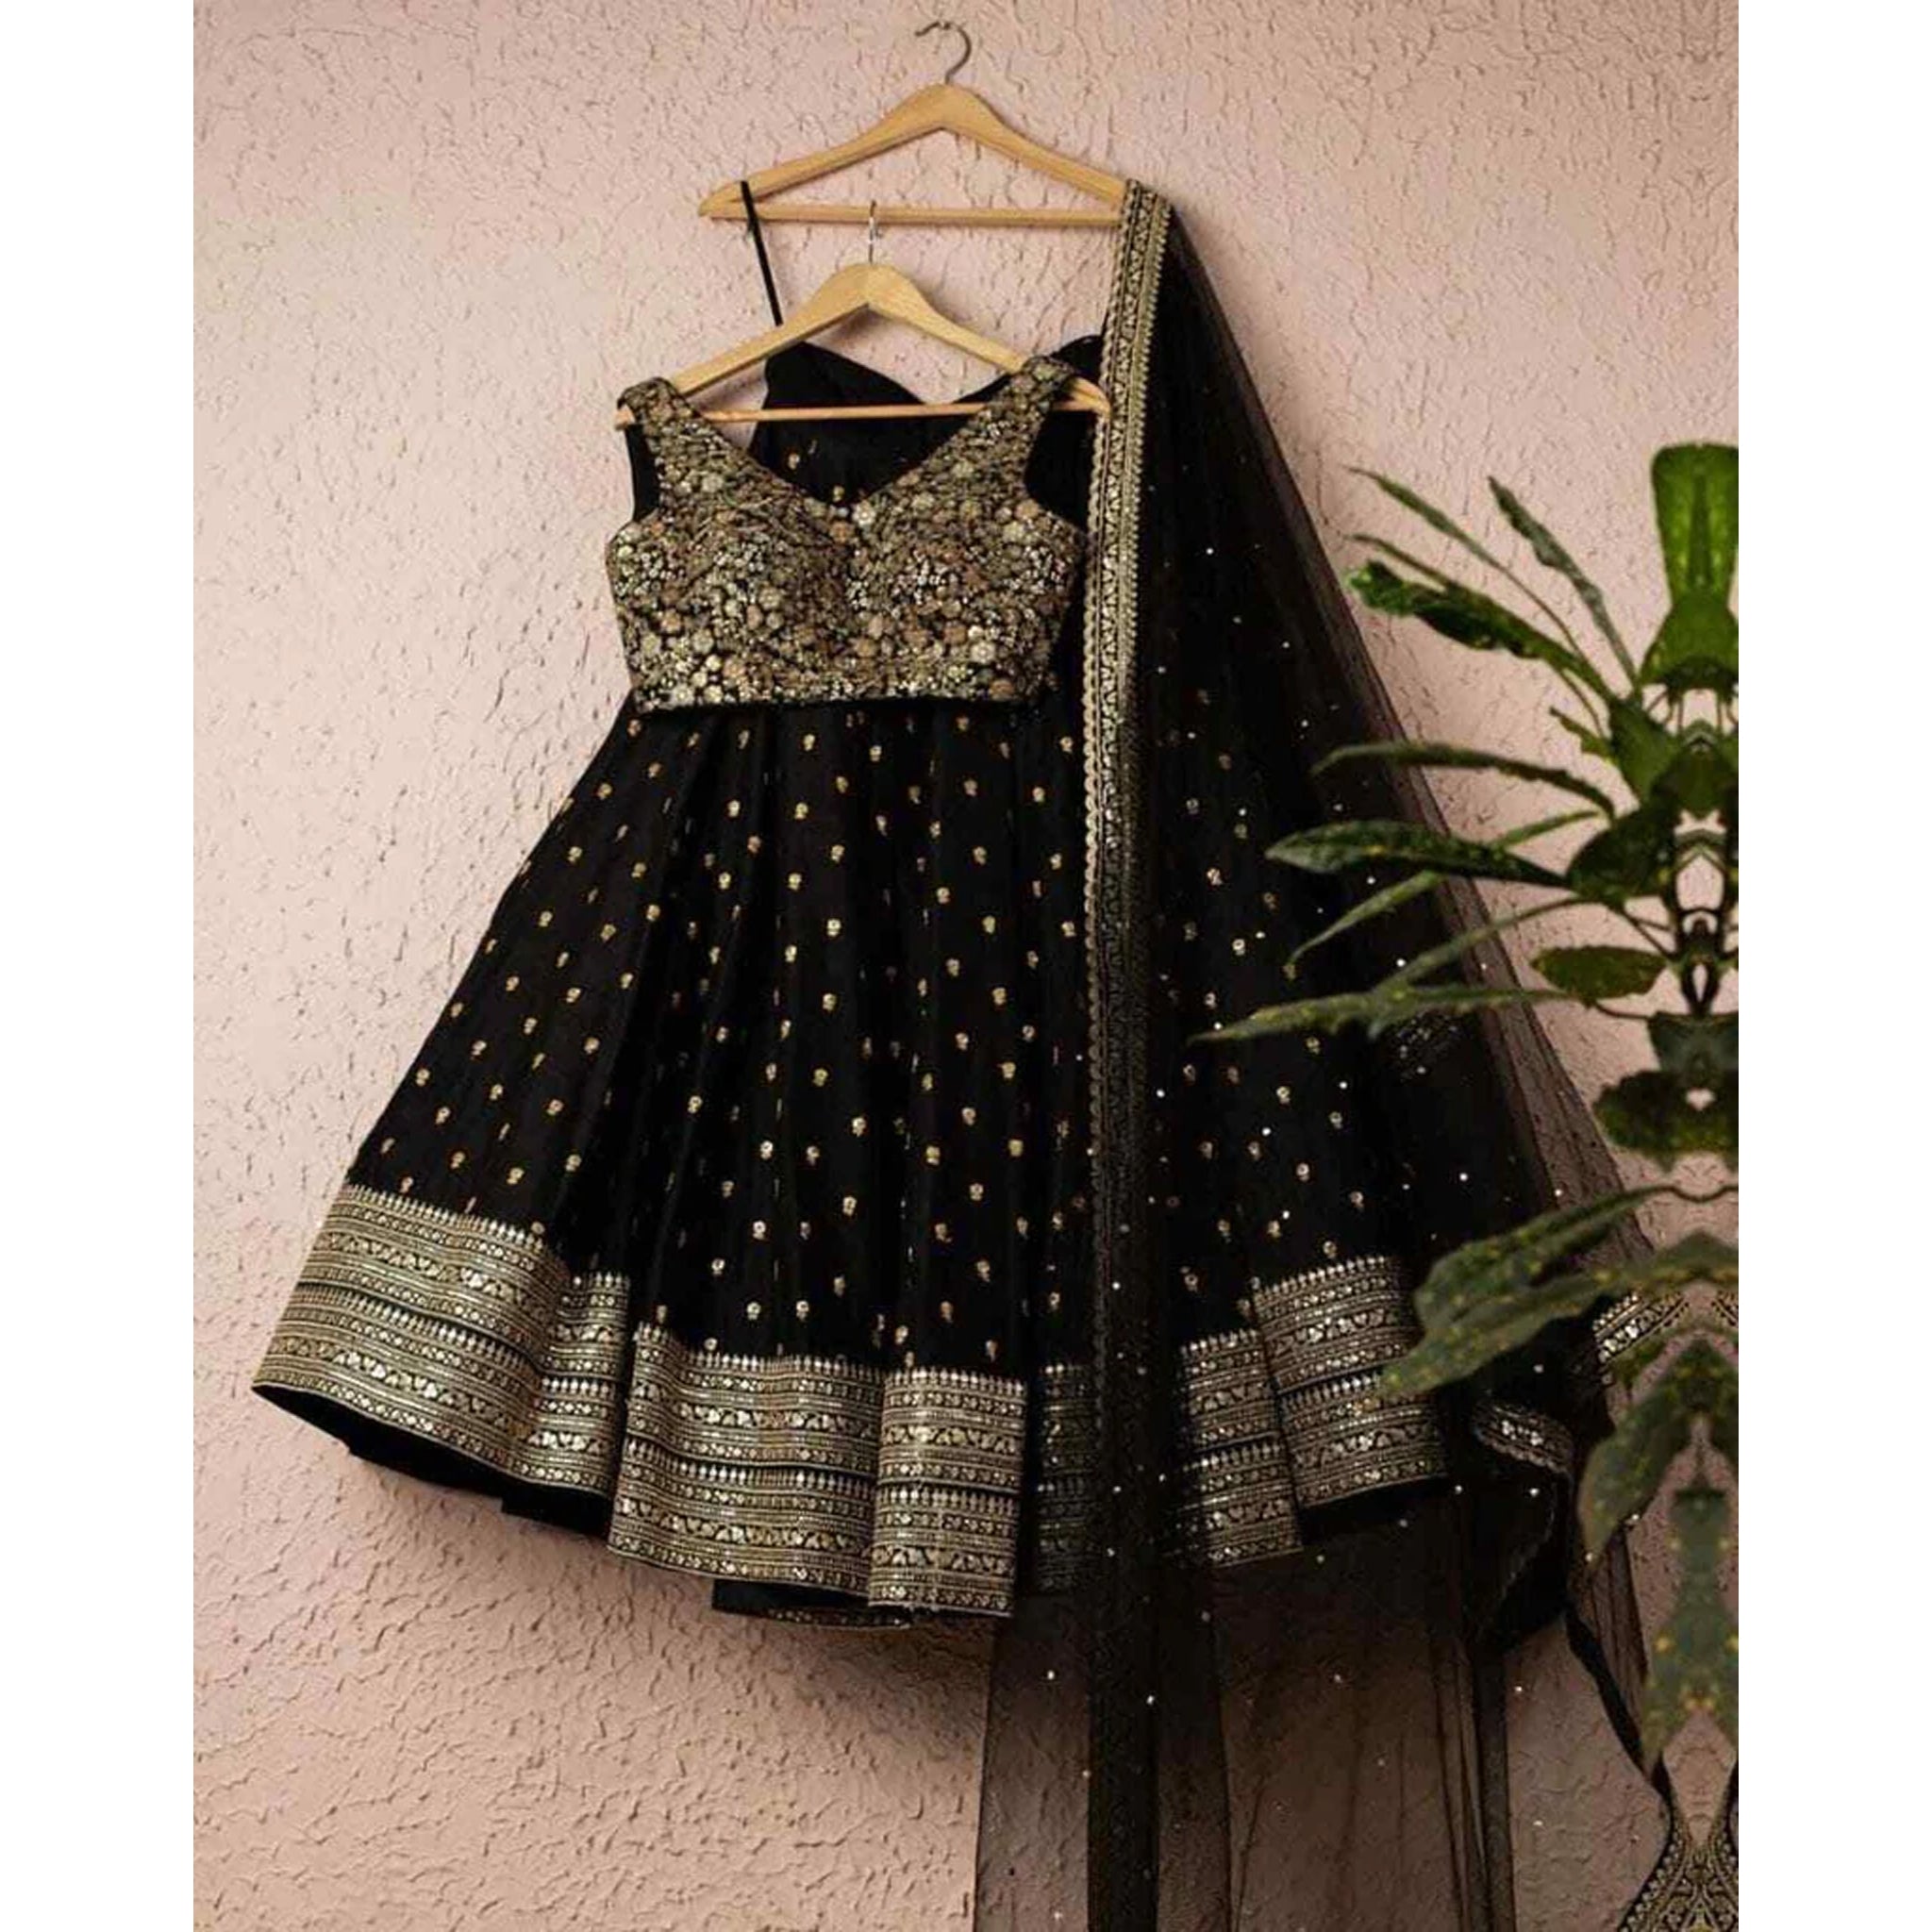 Designer Black Color Georgette Lehenga Saree With Sequence Blouse & Waist  Belt, Wedding/partywear Wear Bollywood Style Stitched Lehengasaree 